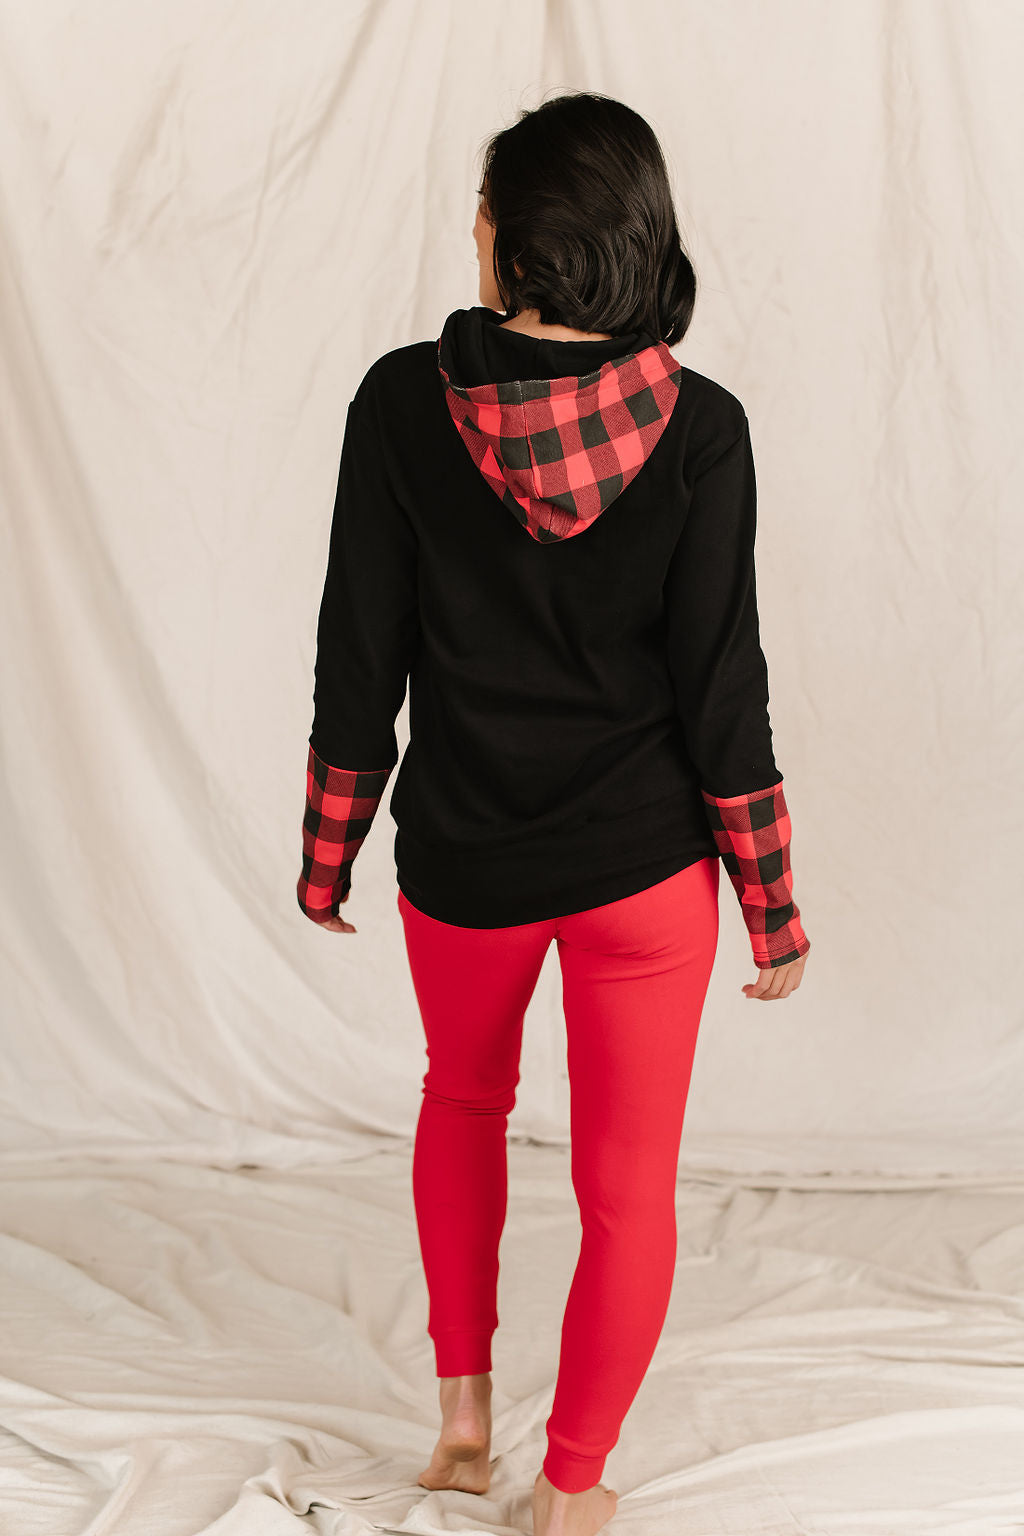 Ampersand Avenue - Halfzip Hoodie Checks Out Red